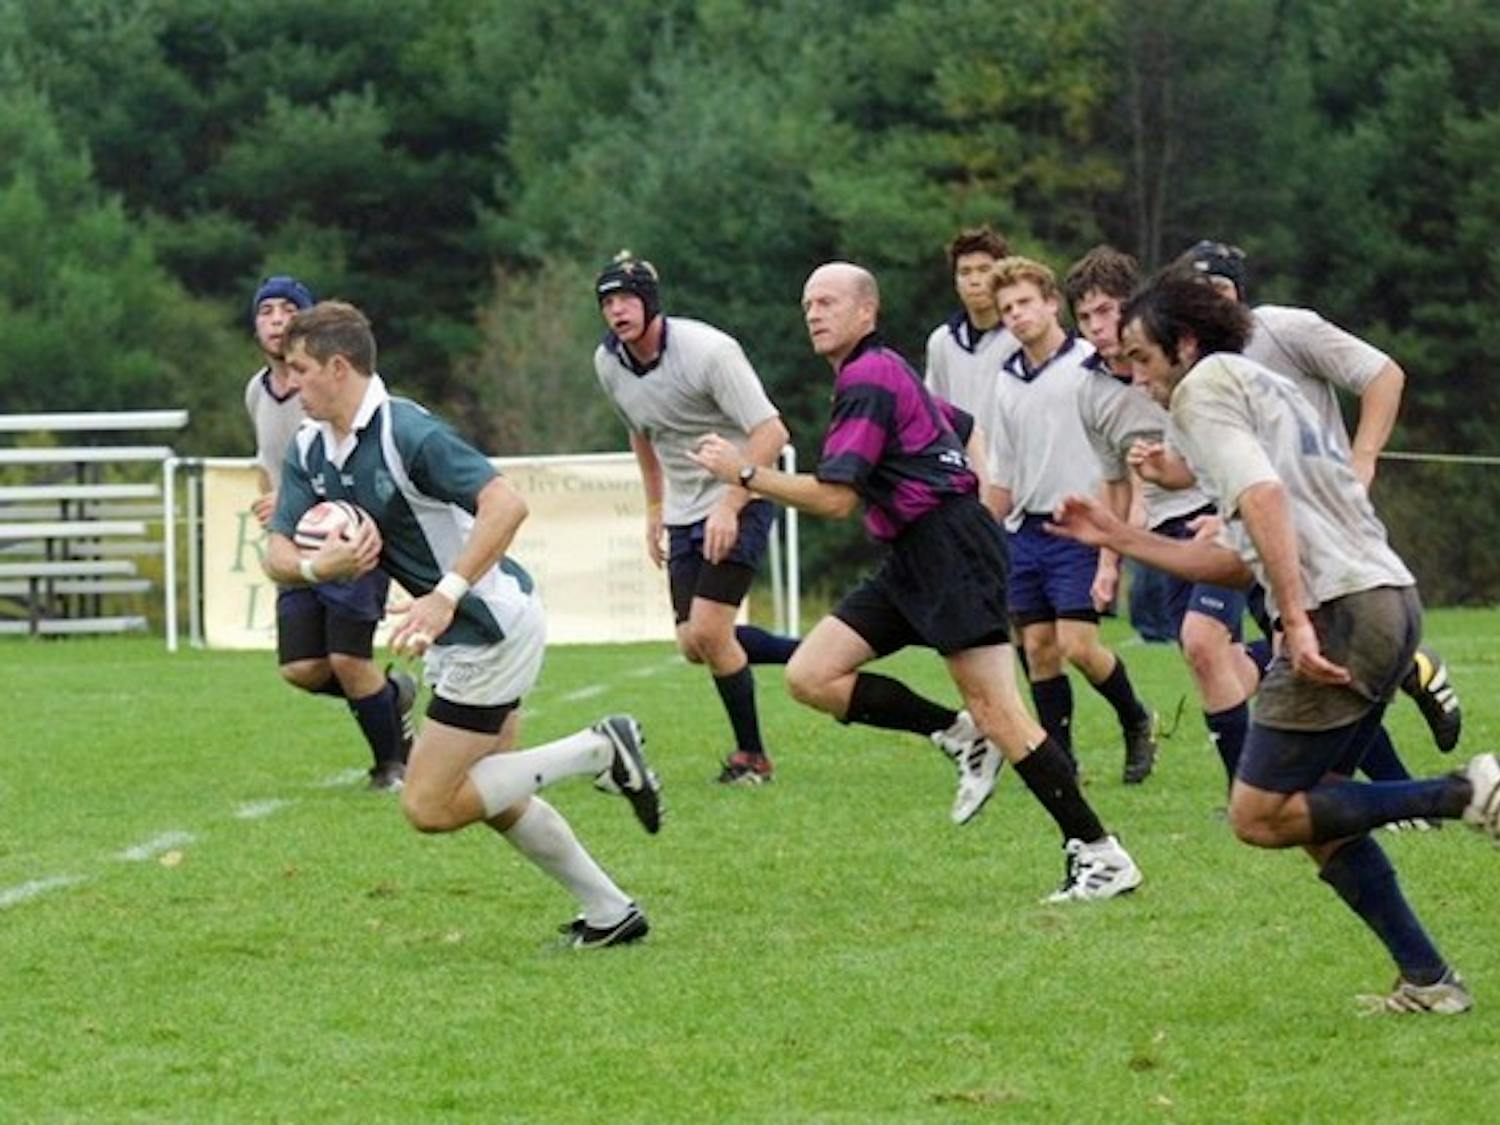 The Dartmouth ruggers ran roughshod over UNH this weekend. Playing through torrential downpours on a field better suited for the swim team, the Big Green ran up a 26-0 lead in the first half before cruising to victory.